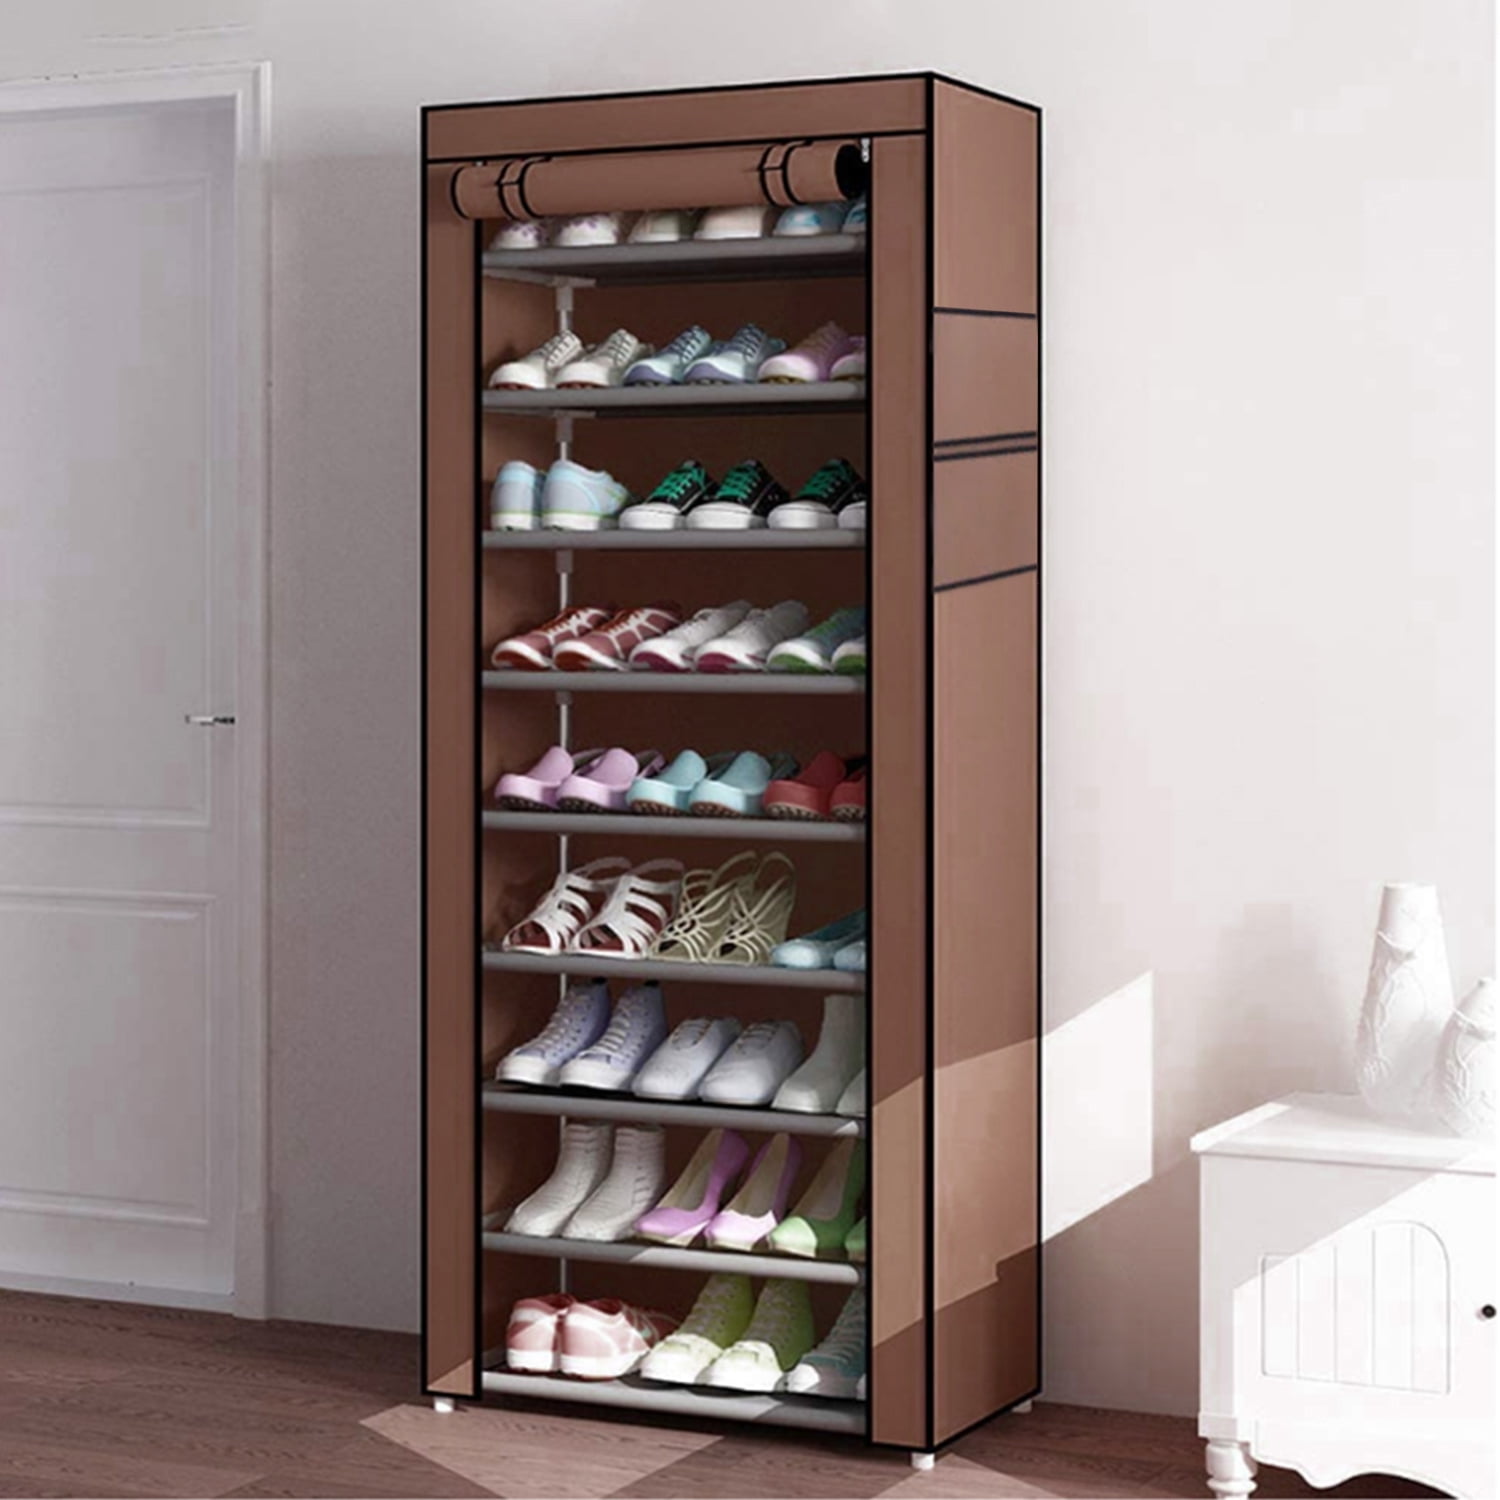 DOORSOUT 8 Tiers Shoe Rack, Vertical Shoe Rack for Small Spaces, Narrow  Shoe Rack for Entryway, Tall Shoe Rack Organizer, Stackable Free Standing  Shoe